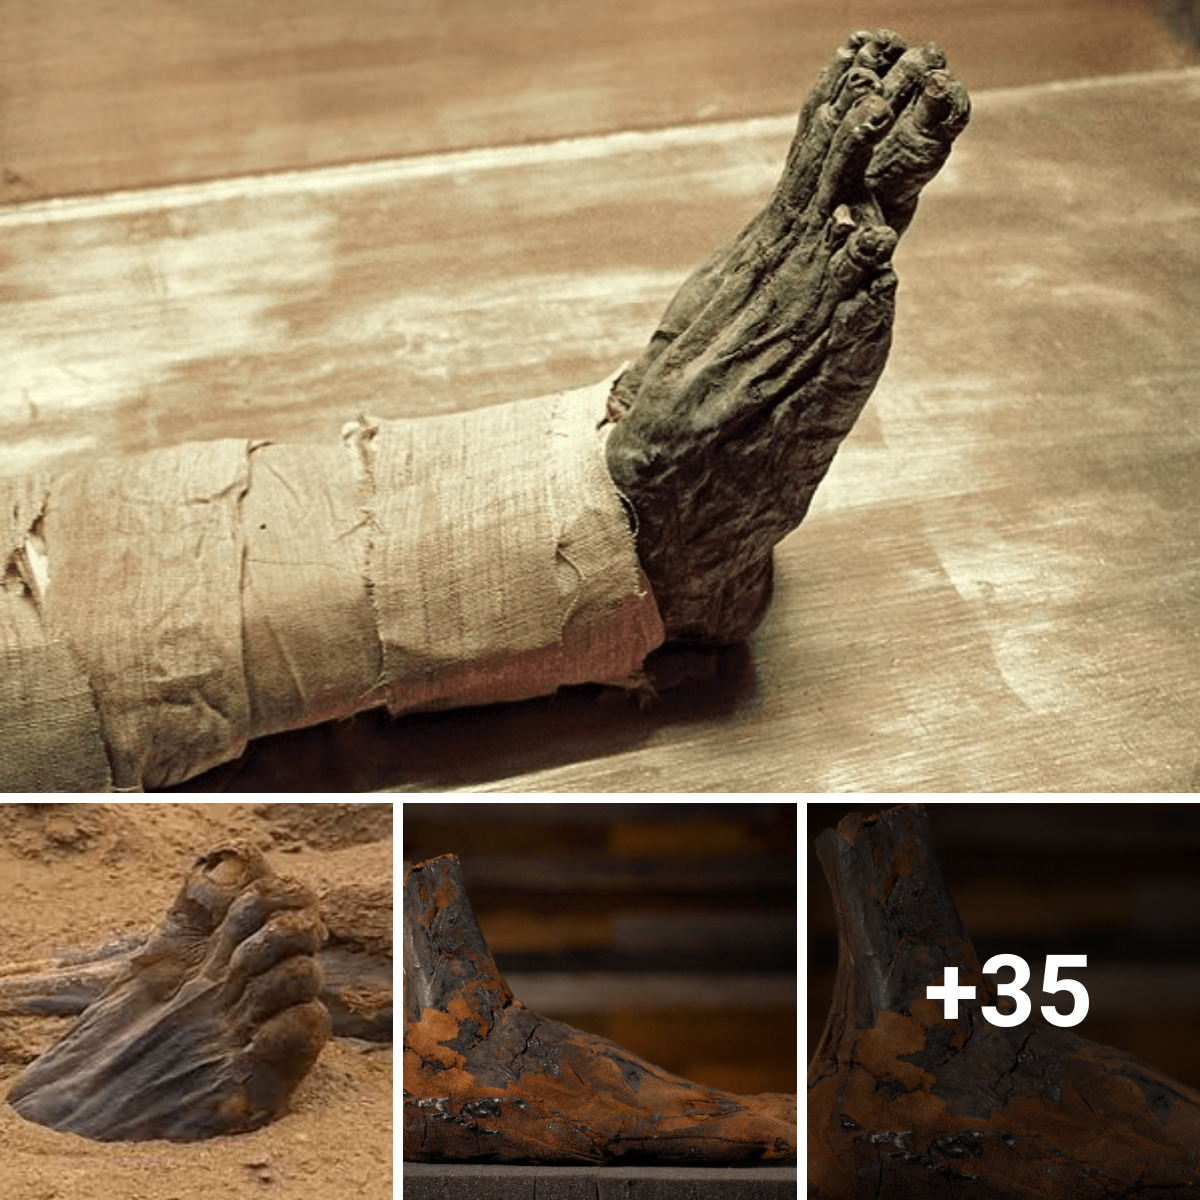 Ancient Enigma Solved: 3,500-year-old mummy’s feet emerge from Saqqara’s sands!